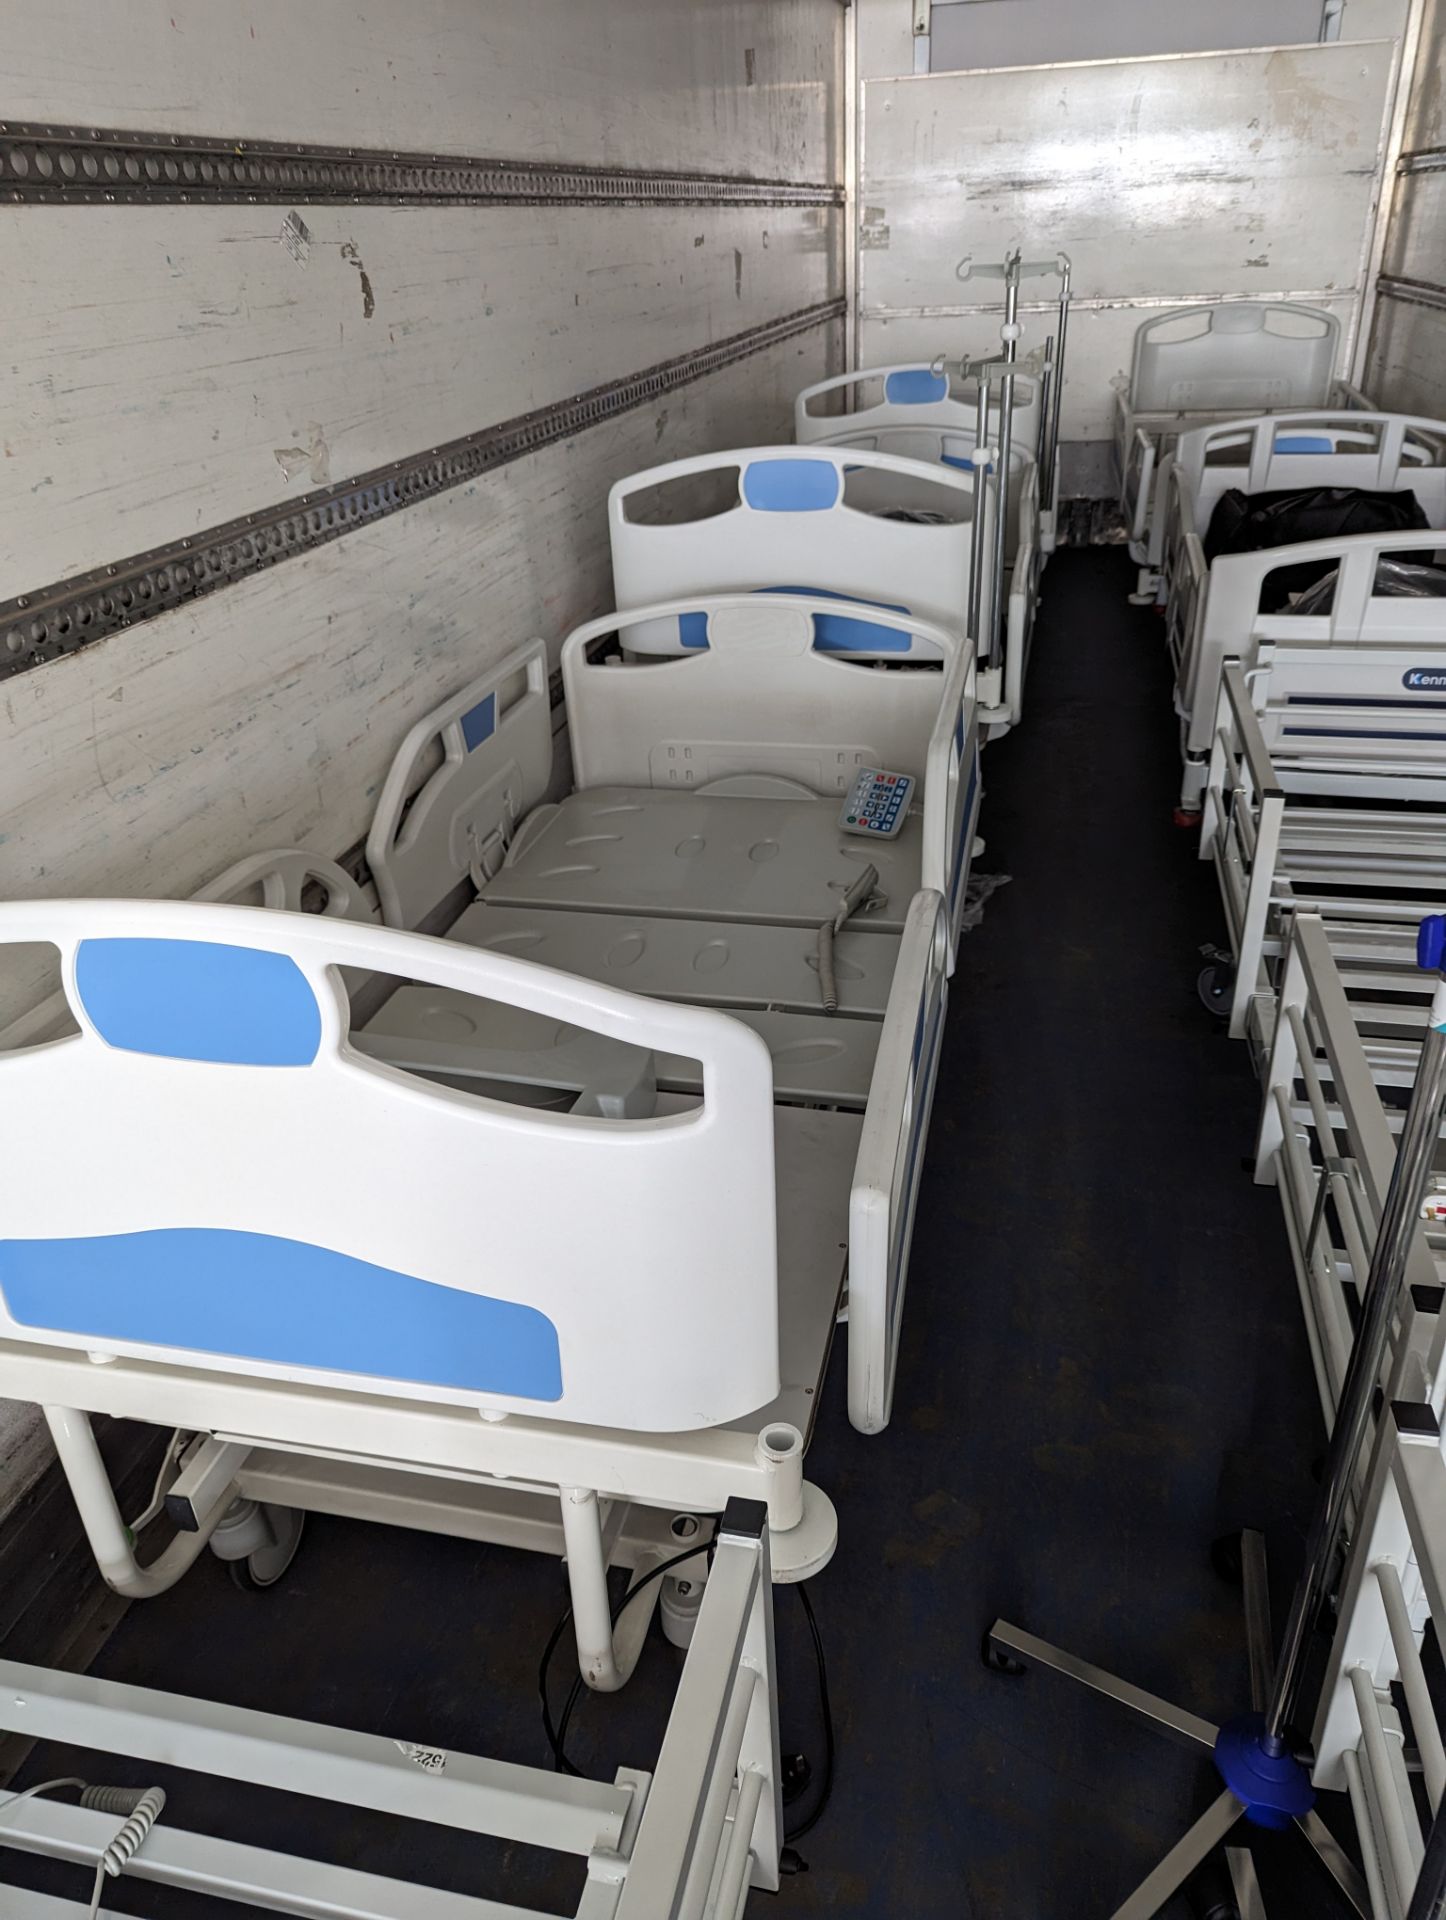 1 x Wissner Bosserhof Sentida 6 Fully Electric Hospital Bed With Mattress - Image 3 of 4